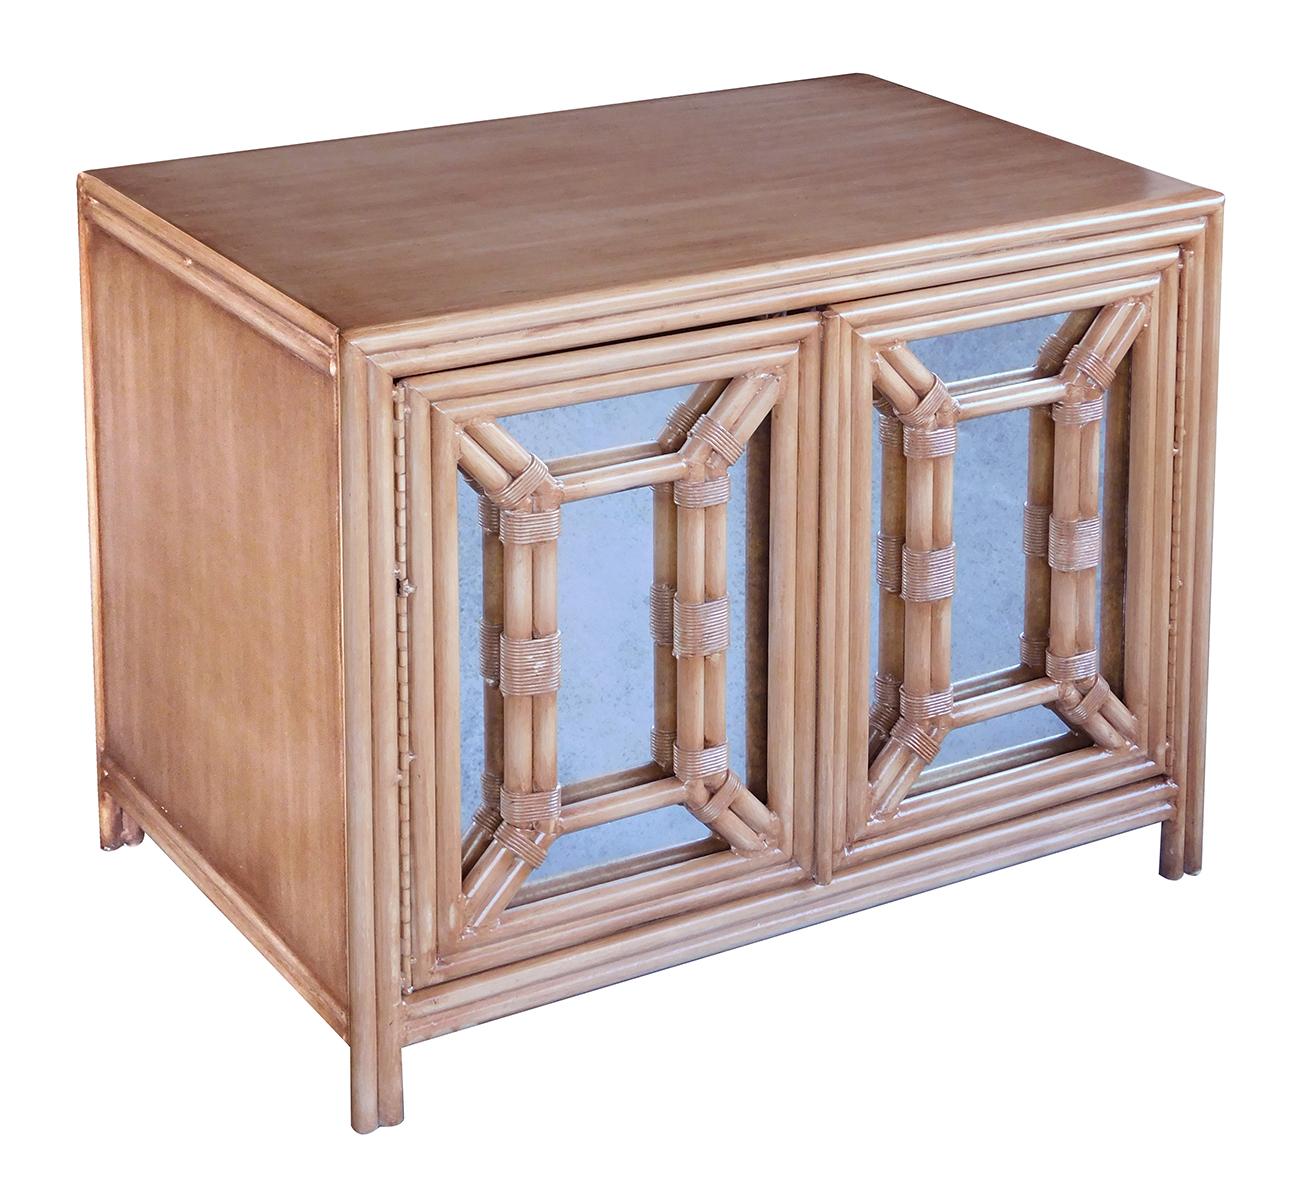 Hollywood Regency Painted Faux Bamboo and Mirrored 2-Door Cabinets In Excellent Condition For Sale In San Francisco, CA